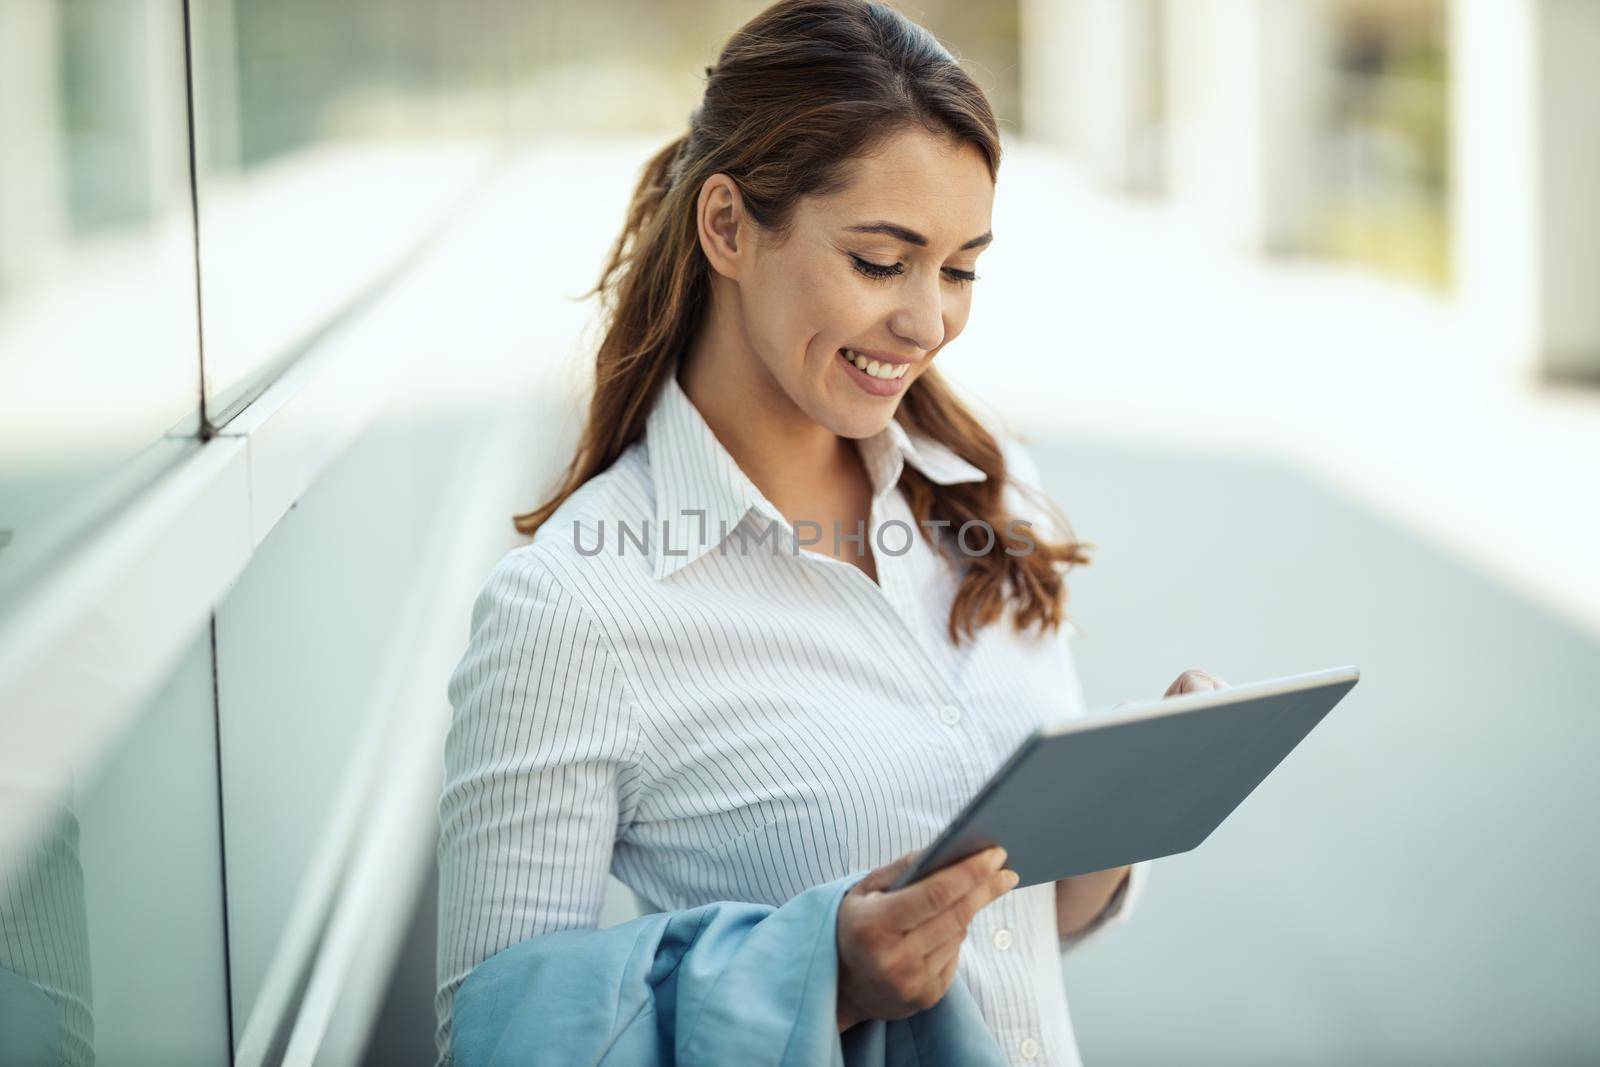 Young smiling businesswoman is surfing social network on digital tablet in front of office during break.